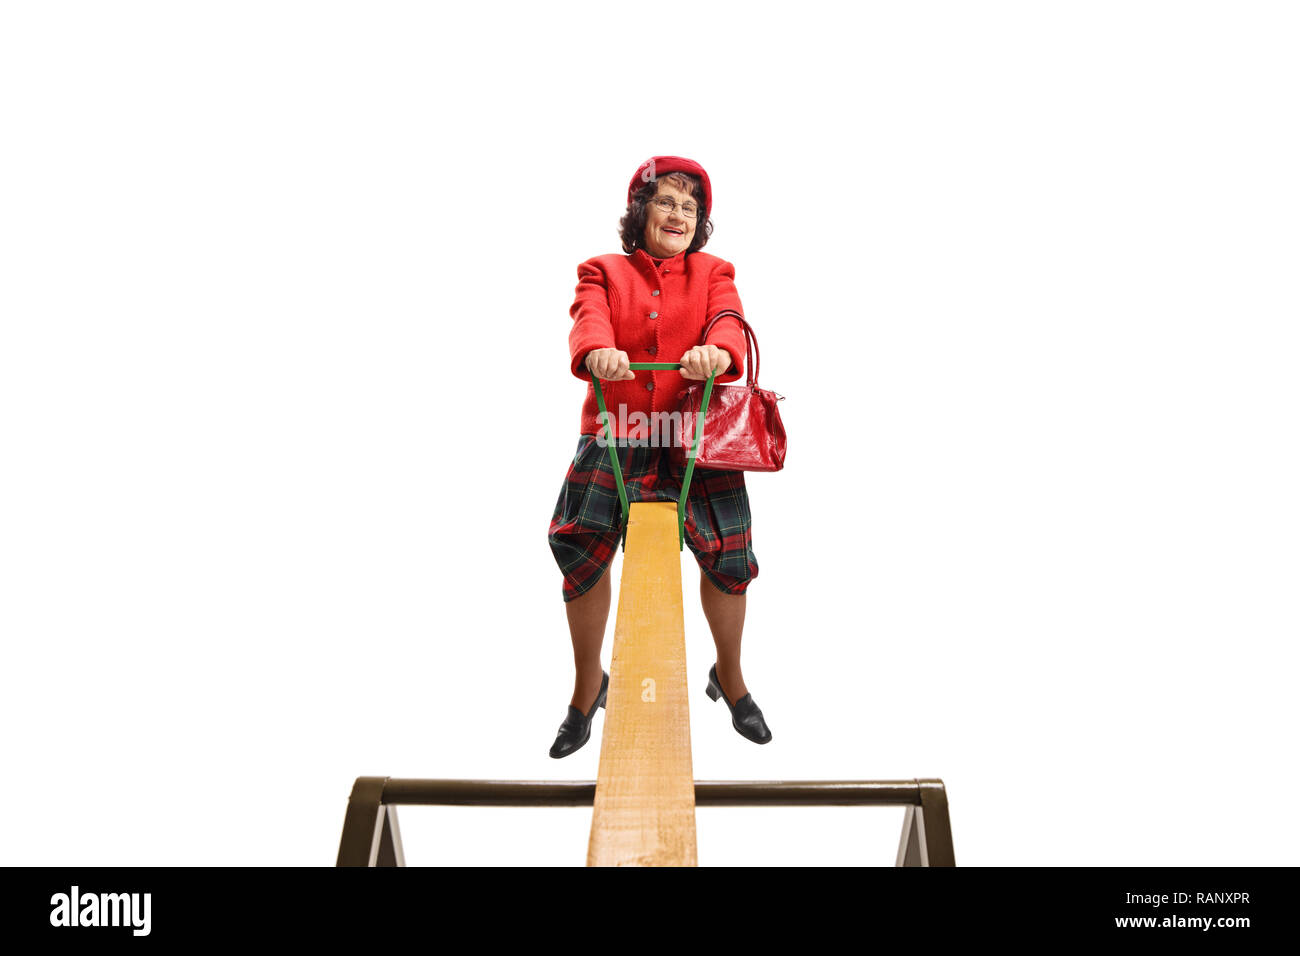 Elderly woman on a seesaw isolated on white background Stock Photo